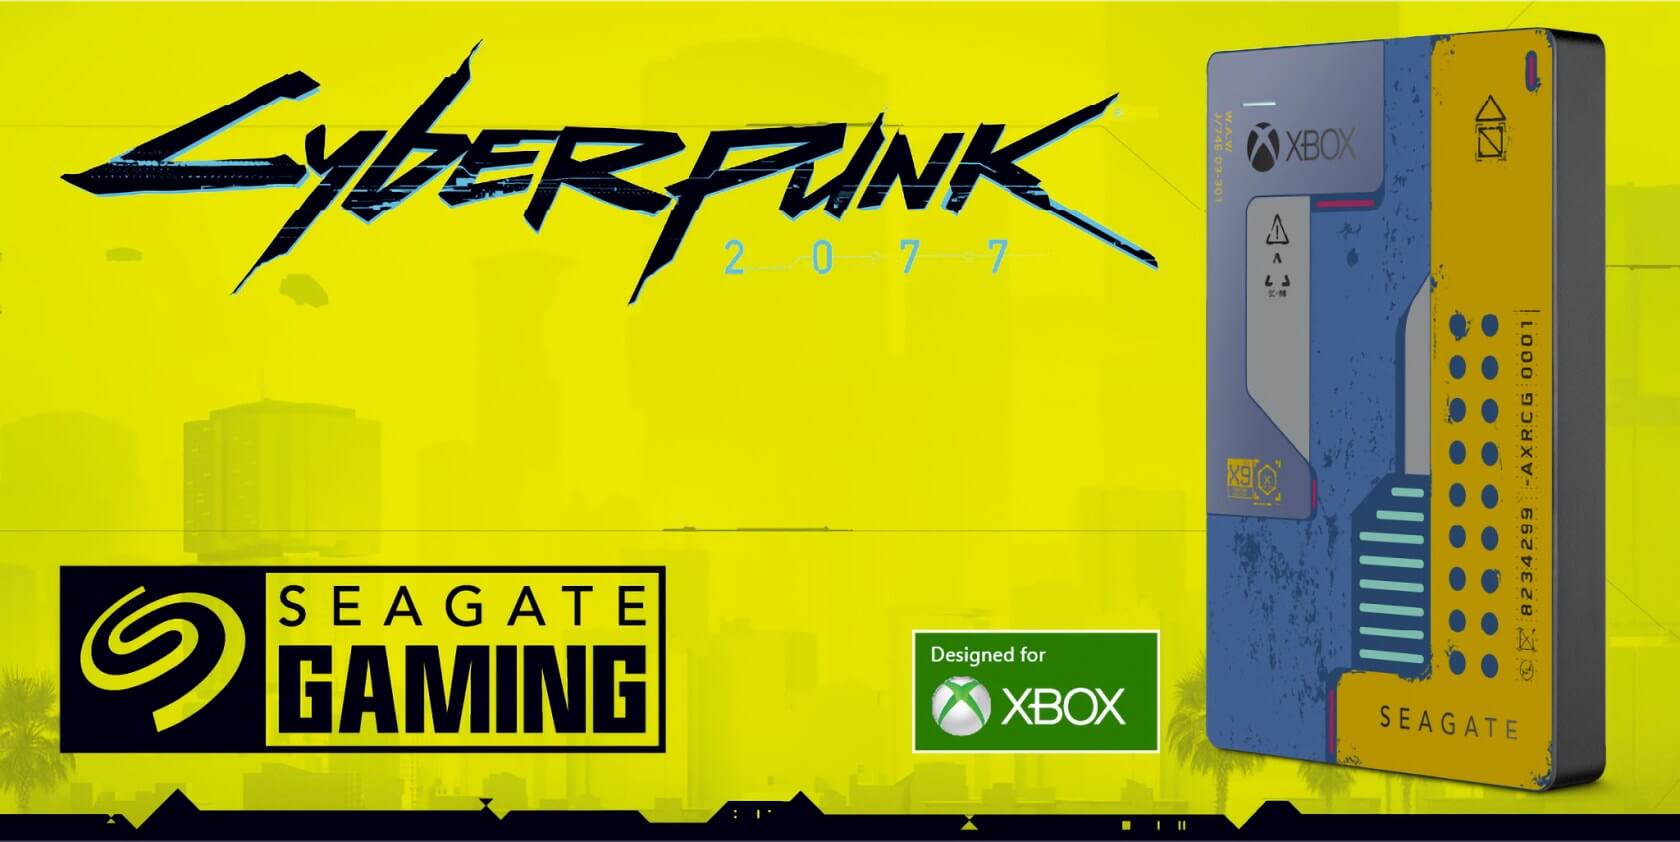 Seagate reveals limited edition Cyberpunk 2077-themed Xbox Game Drive